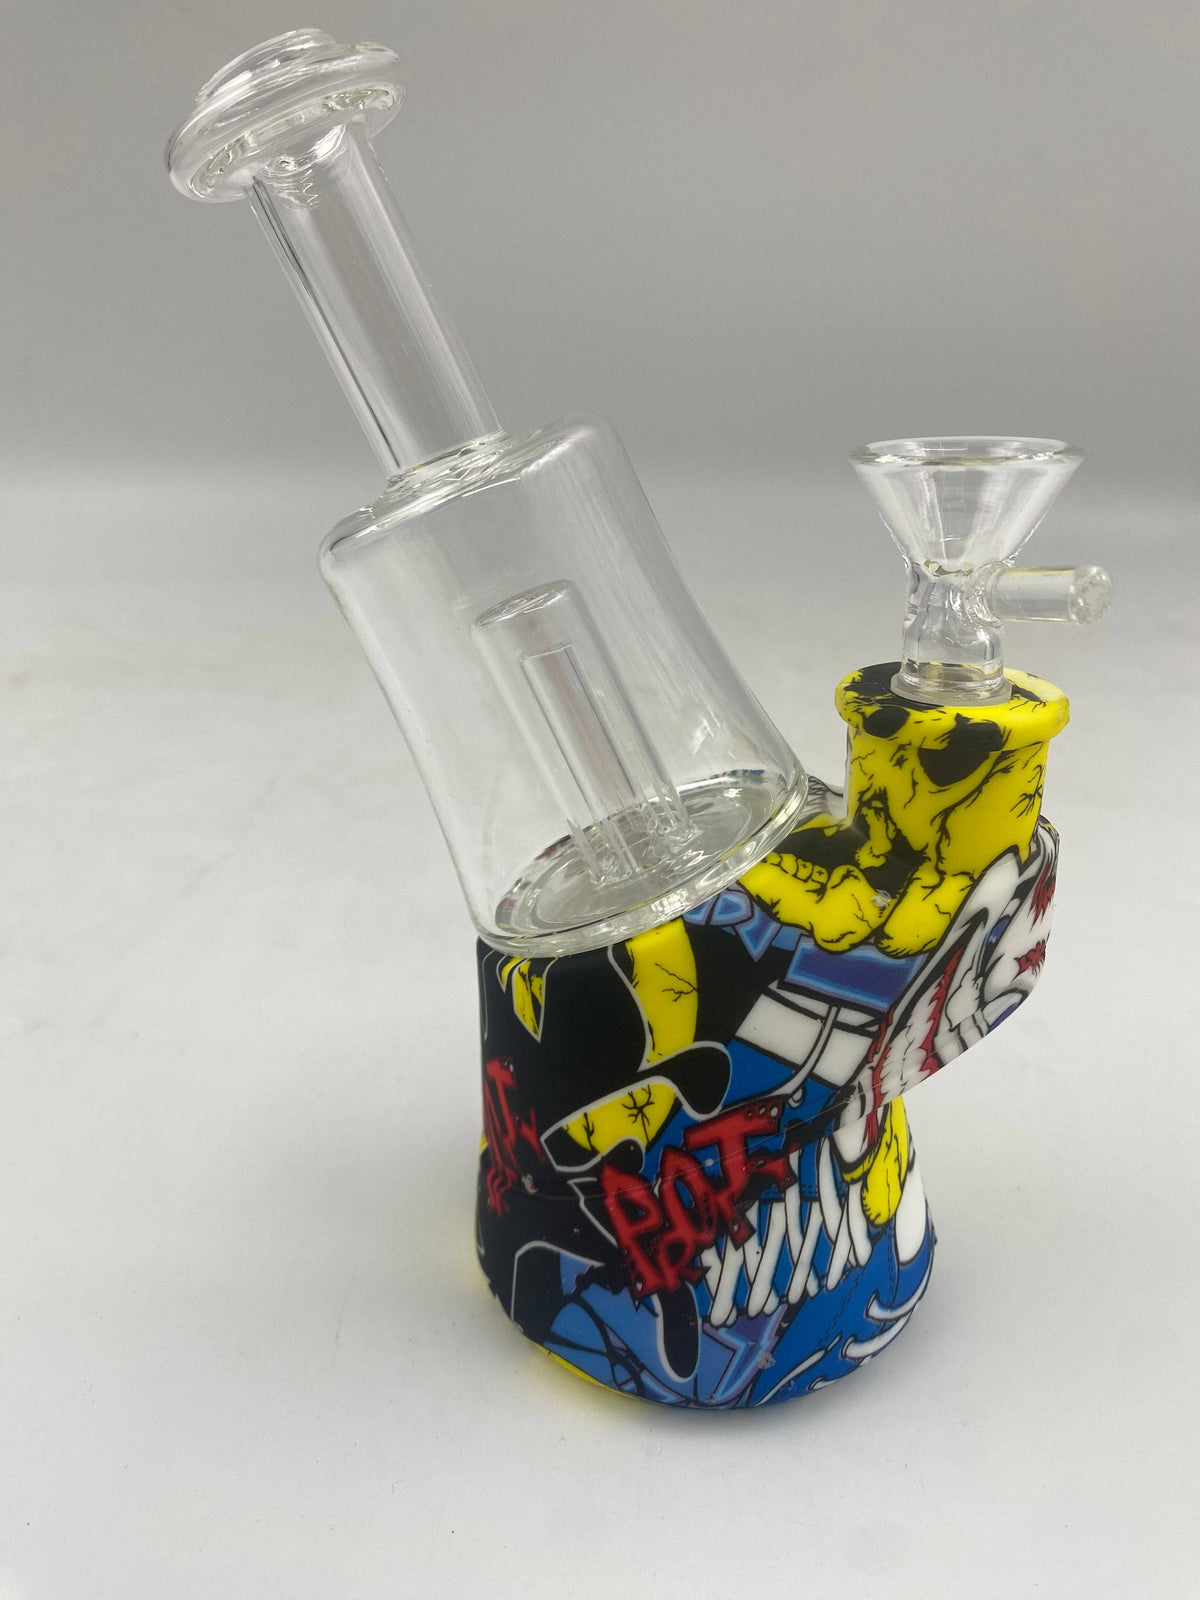 6.5" Silicone Water Pipe With Glass Chamber and Animated Design